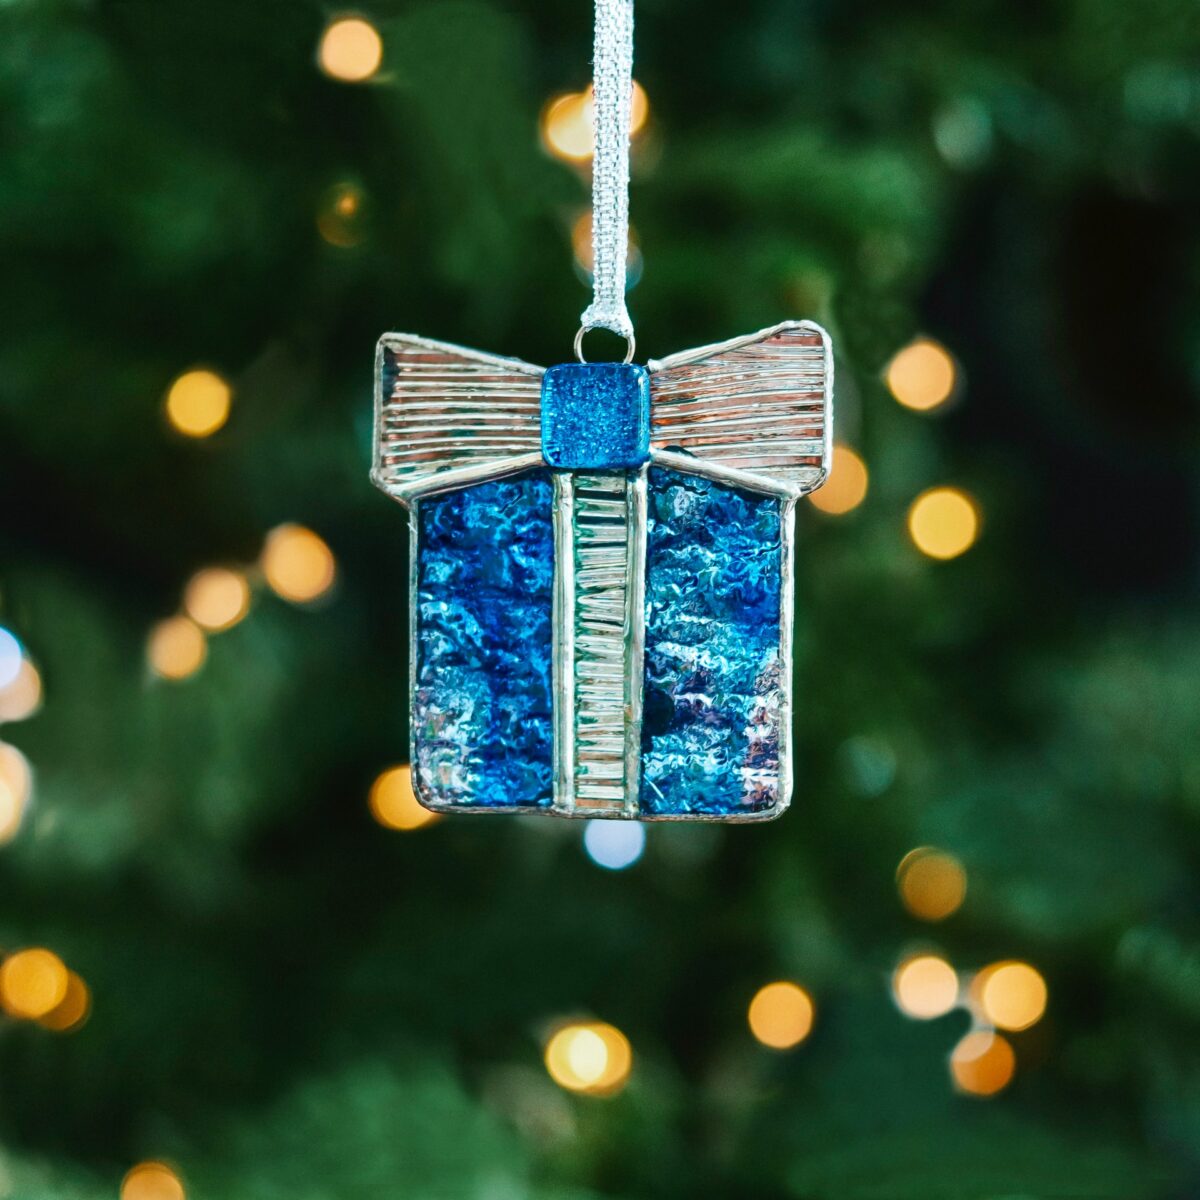 blue and white hanging decor